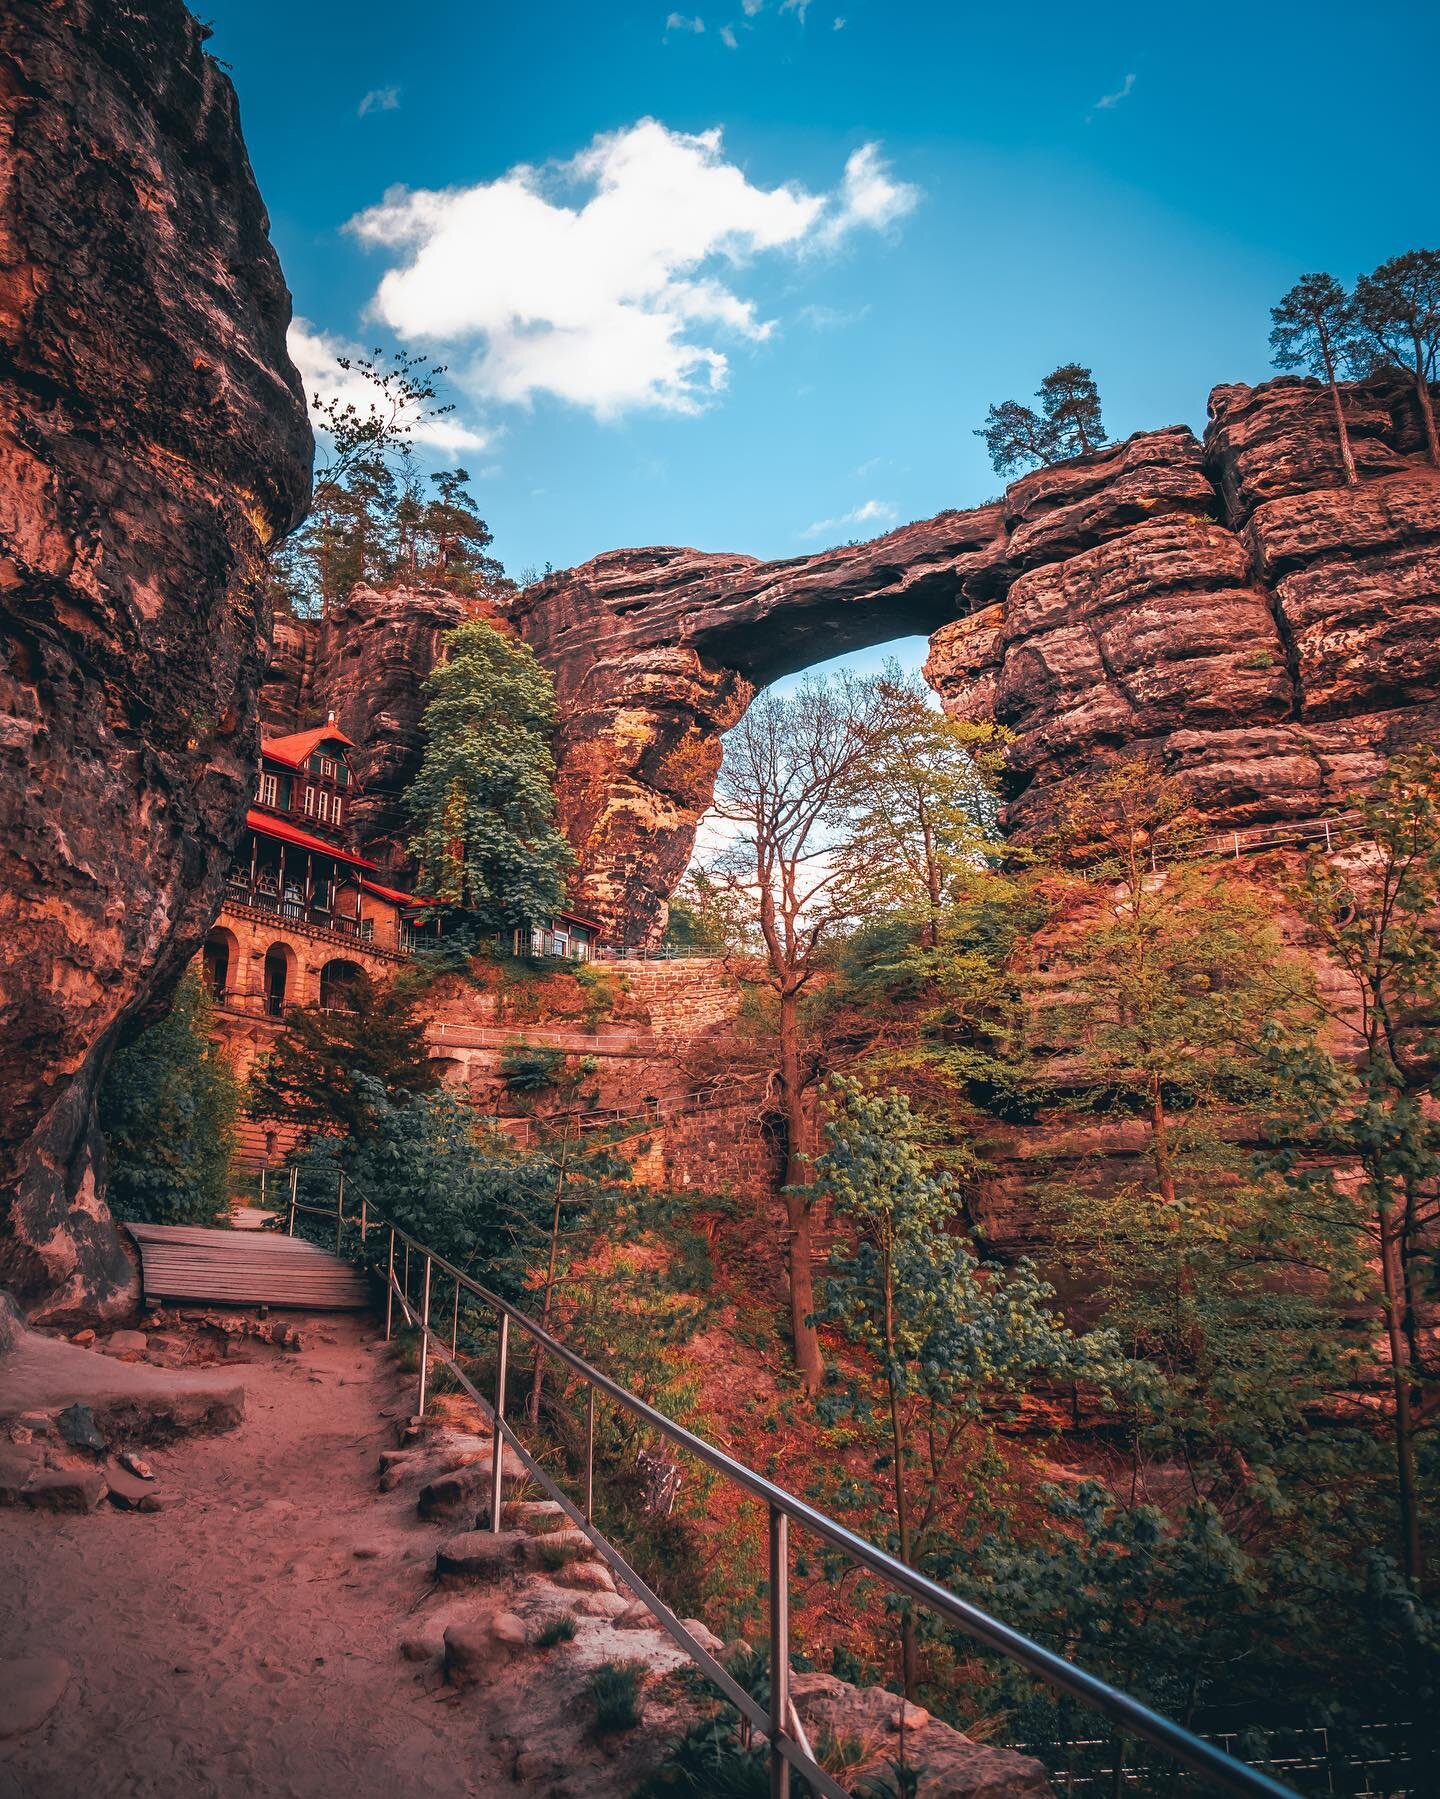 Pravčická brána, largest natural sandstone arch in Europe and a tiny Falcon&rsquo;s Nest Hotel built next to it. 🇨🇿⛰#czechia #bohemianswitzerland #thisisczech #pravcickabrana #falconsnest #hotel #arch #sandstone #visitczech #travel #instaczech #